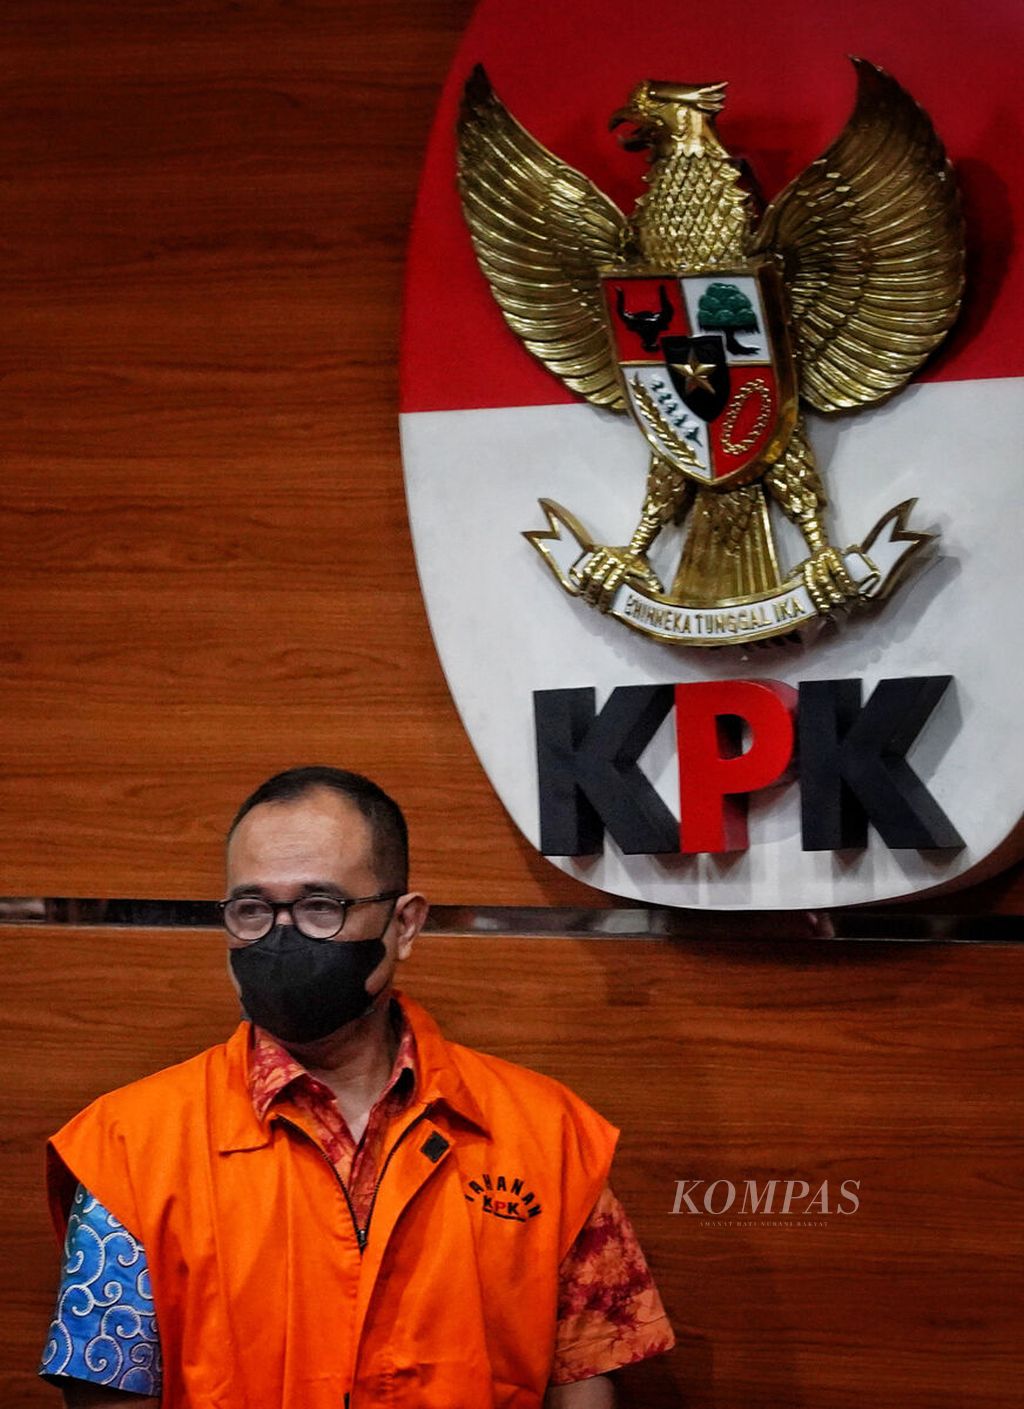 Rafael Alun Trisambodo entered the exposure room at the Corruption Eradication Commission (KPK) Office, Jakarta, after being questioned as a suspect and officially detained, Monday (3/4/2023). Rafael Alum Trisambodo is suspected of receiving gratuities from taxpayers for conditioning various tax audit findings.